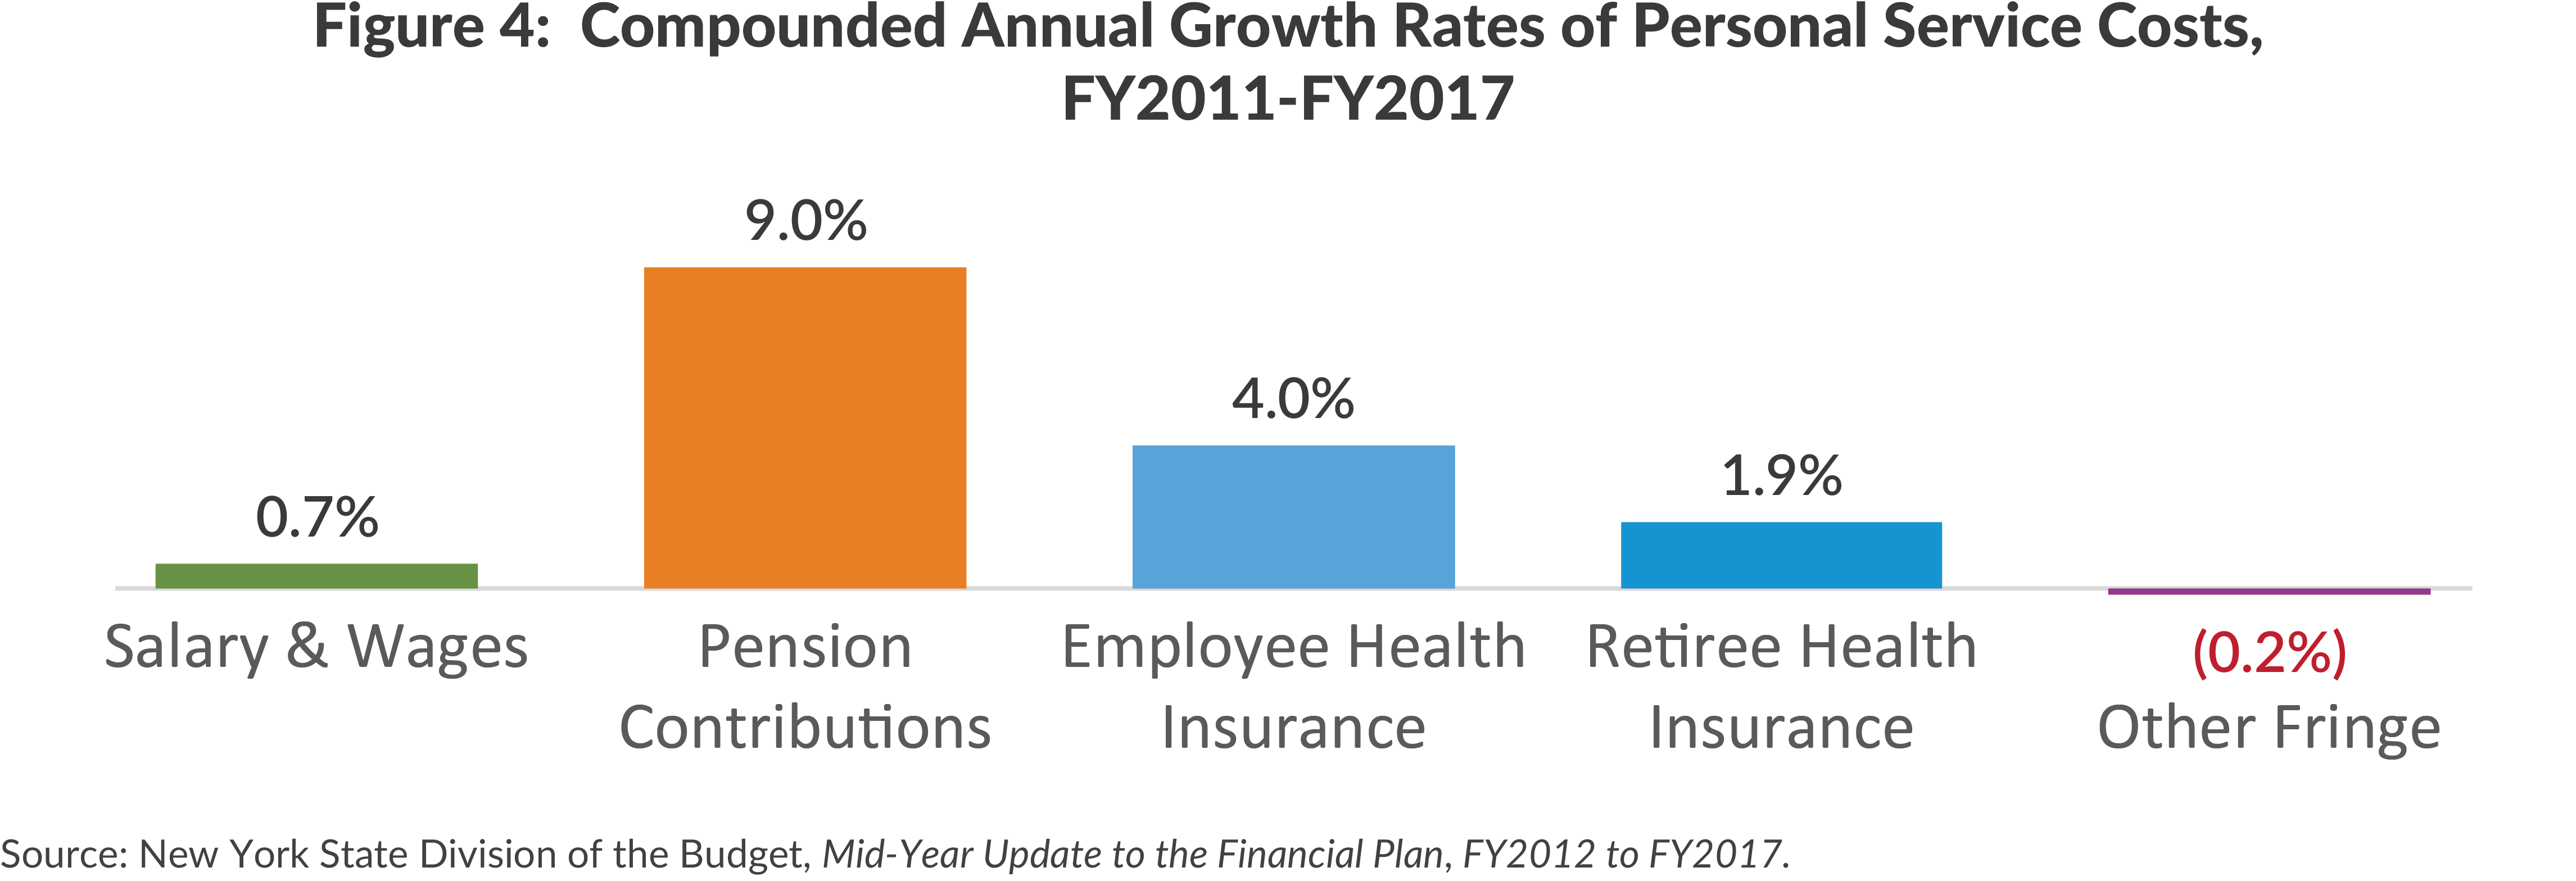 Figure 4: Compounded Annual Growth Rates of Personal Service Costs,FY2011-FY2017(